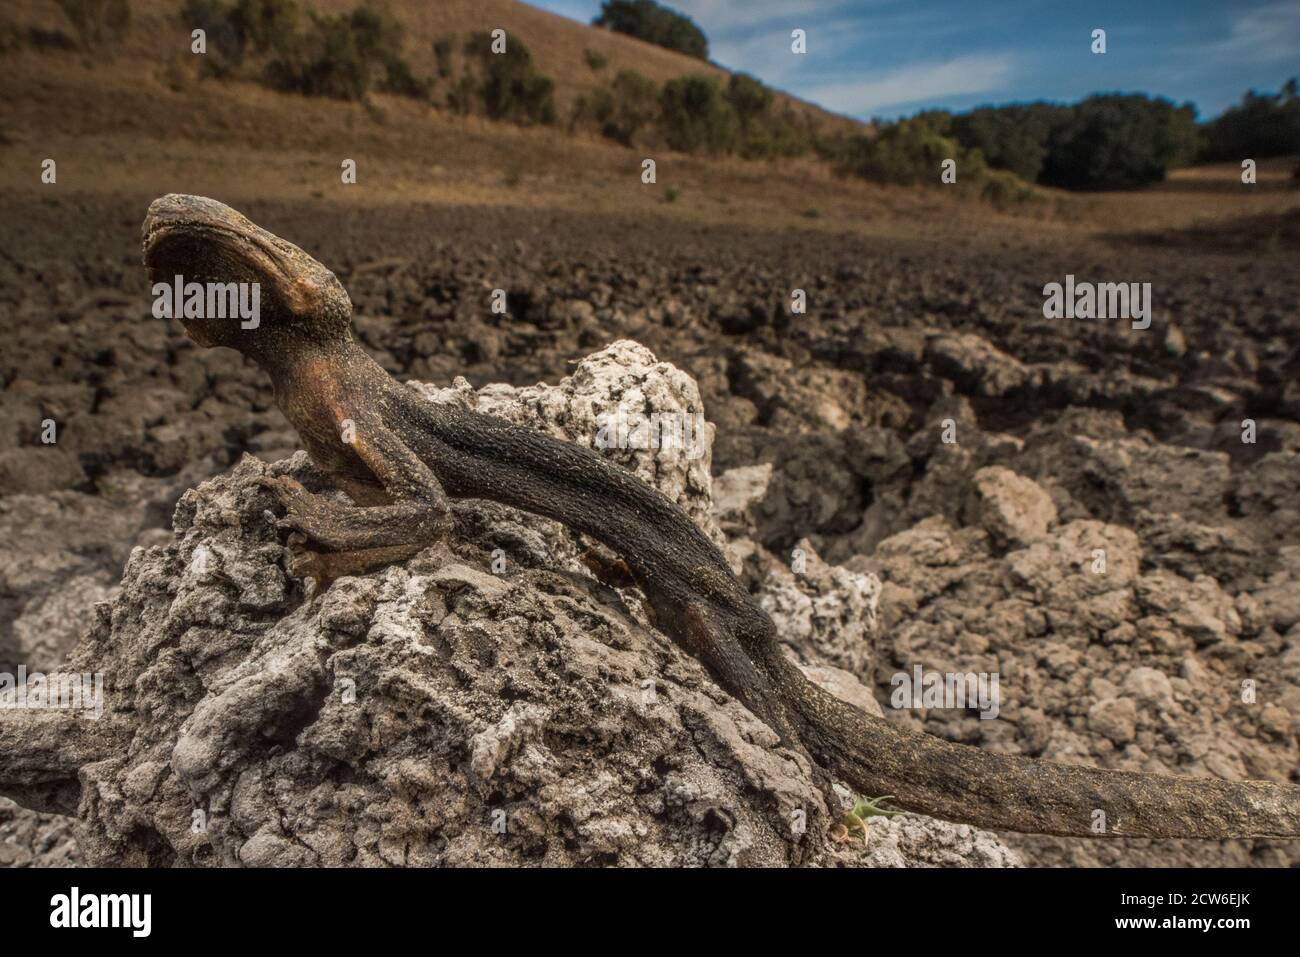 The desiccated body of a California newt in a dried up pond in the East Bay hills of California. Stock Photo